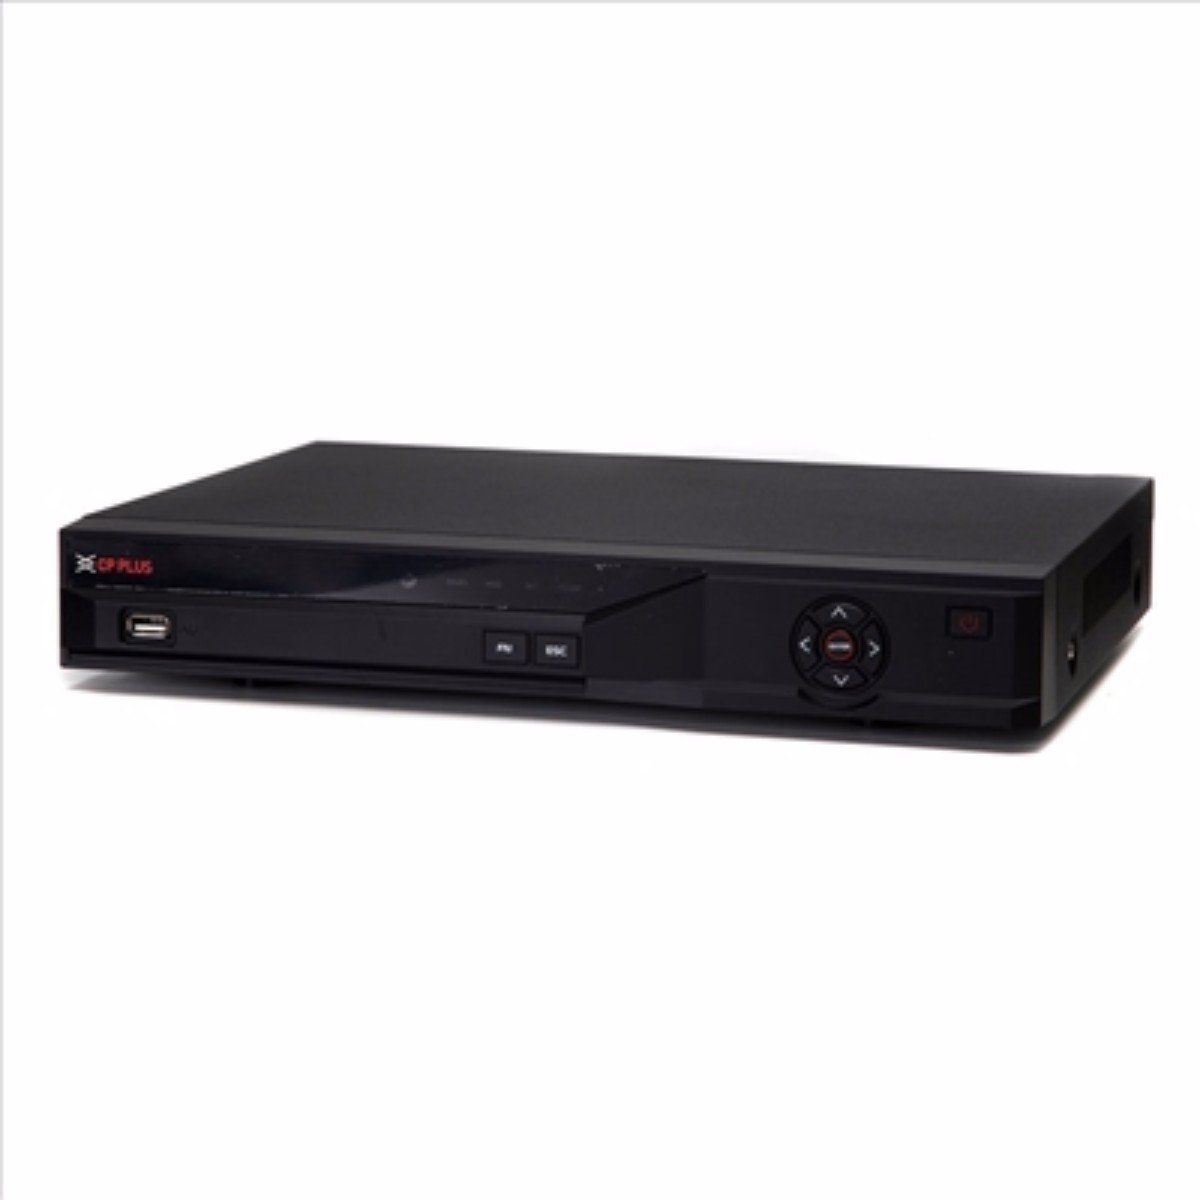 CP Plus CP-UVR-0808E1-S (without Harddisk) 8 Channel DVR (Black)